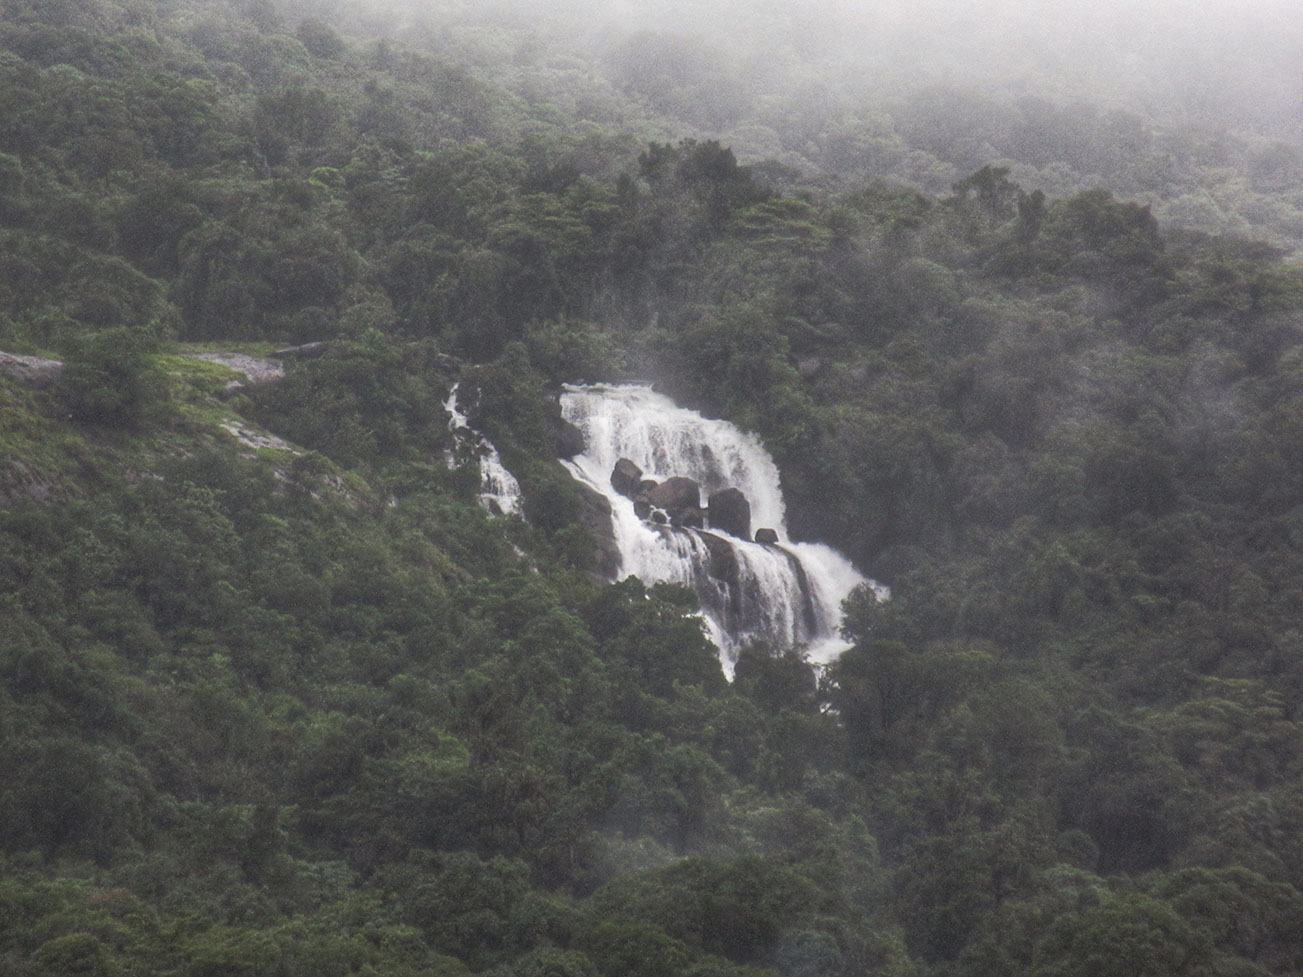 Milky white water of Onti falls cascade with a roar while you trek to Kotte Betta in Coorg.